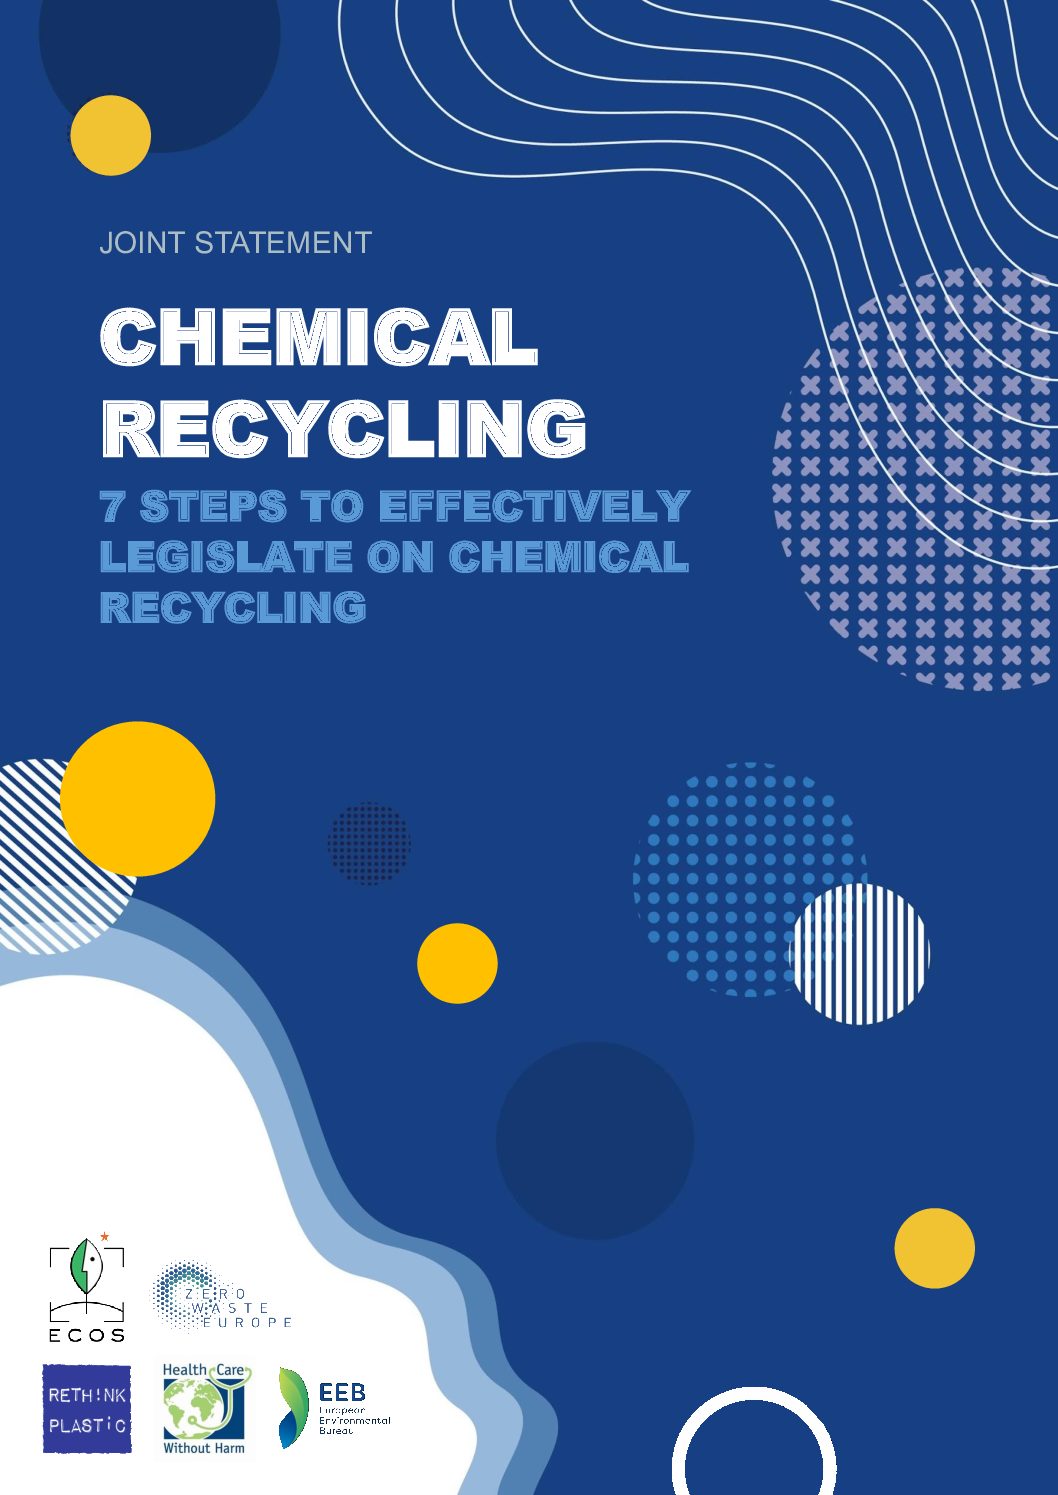 7 Steps to Effectively Legislate Chemical Recycling